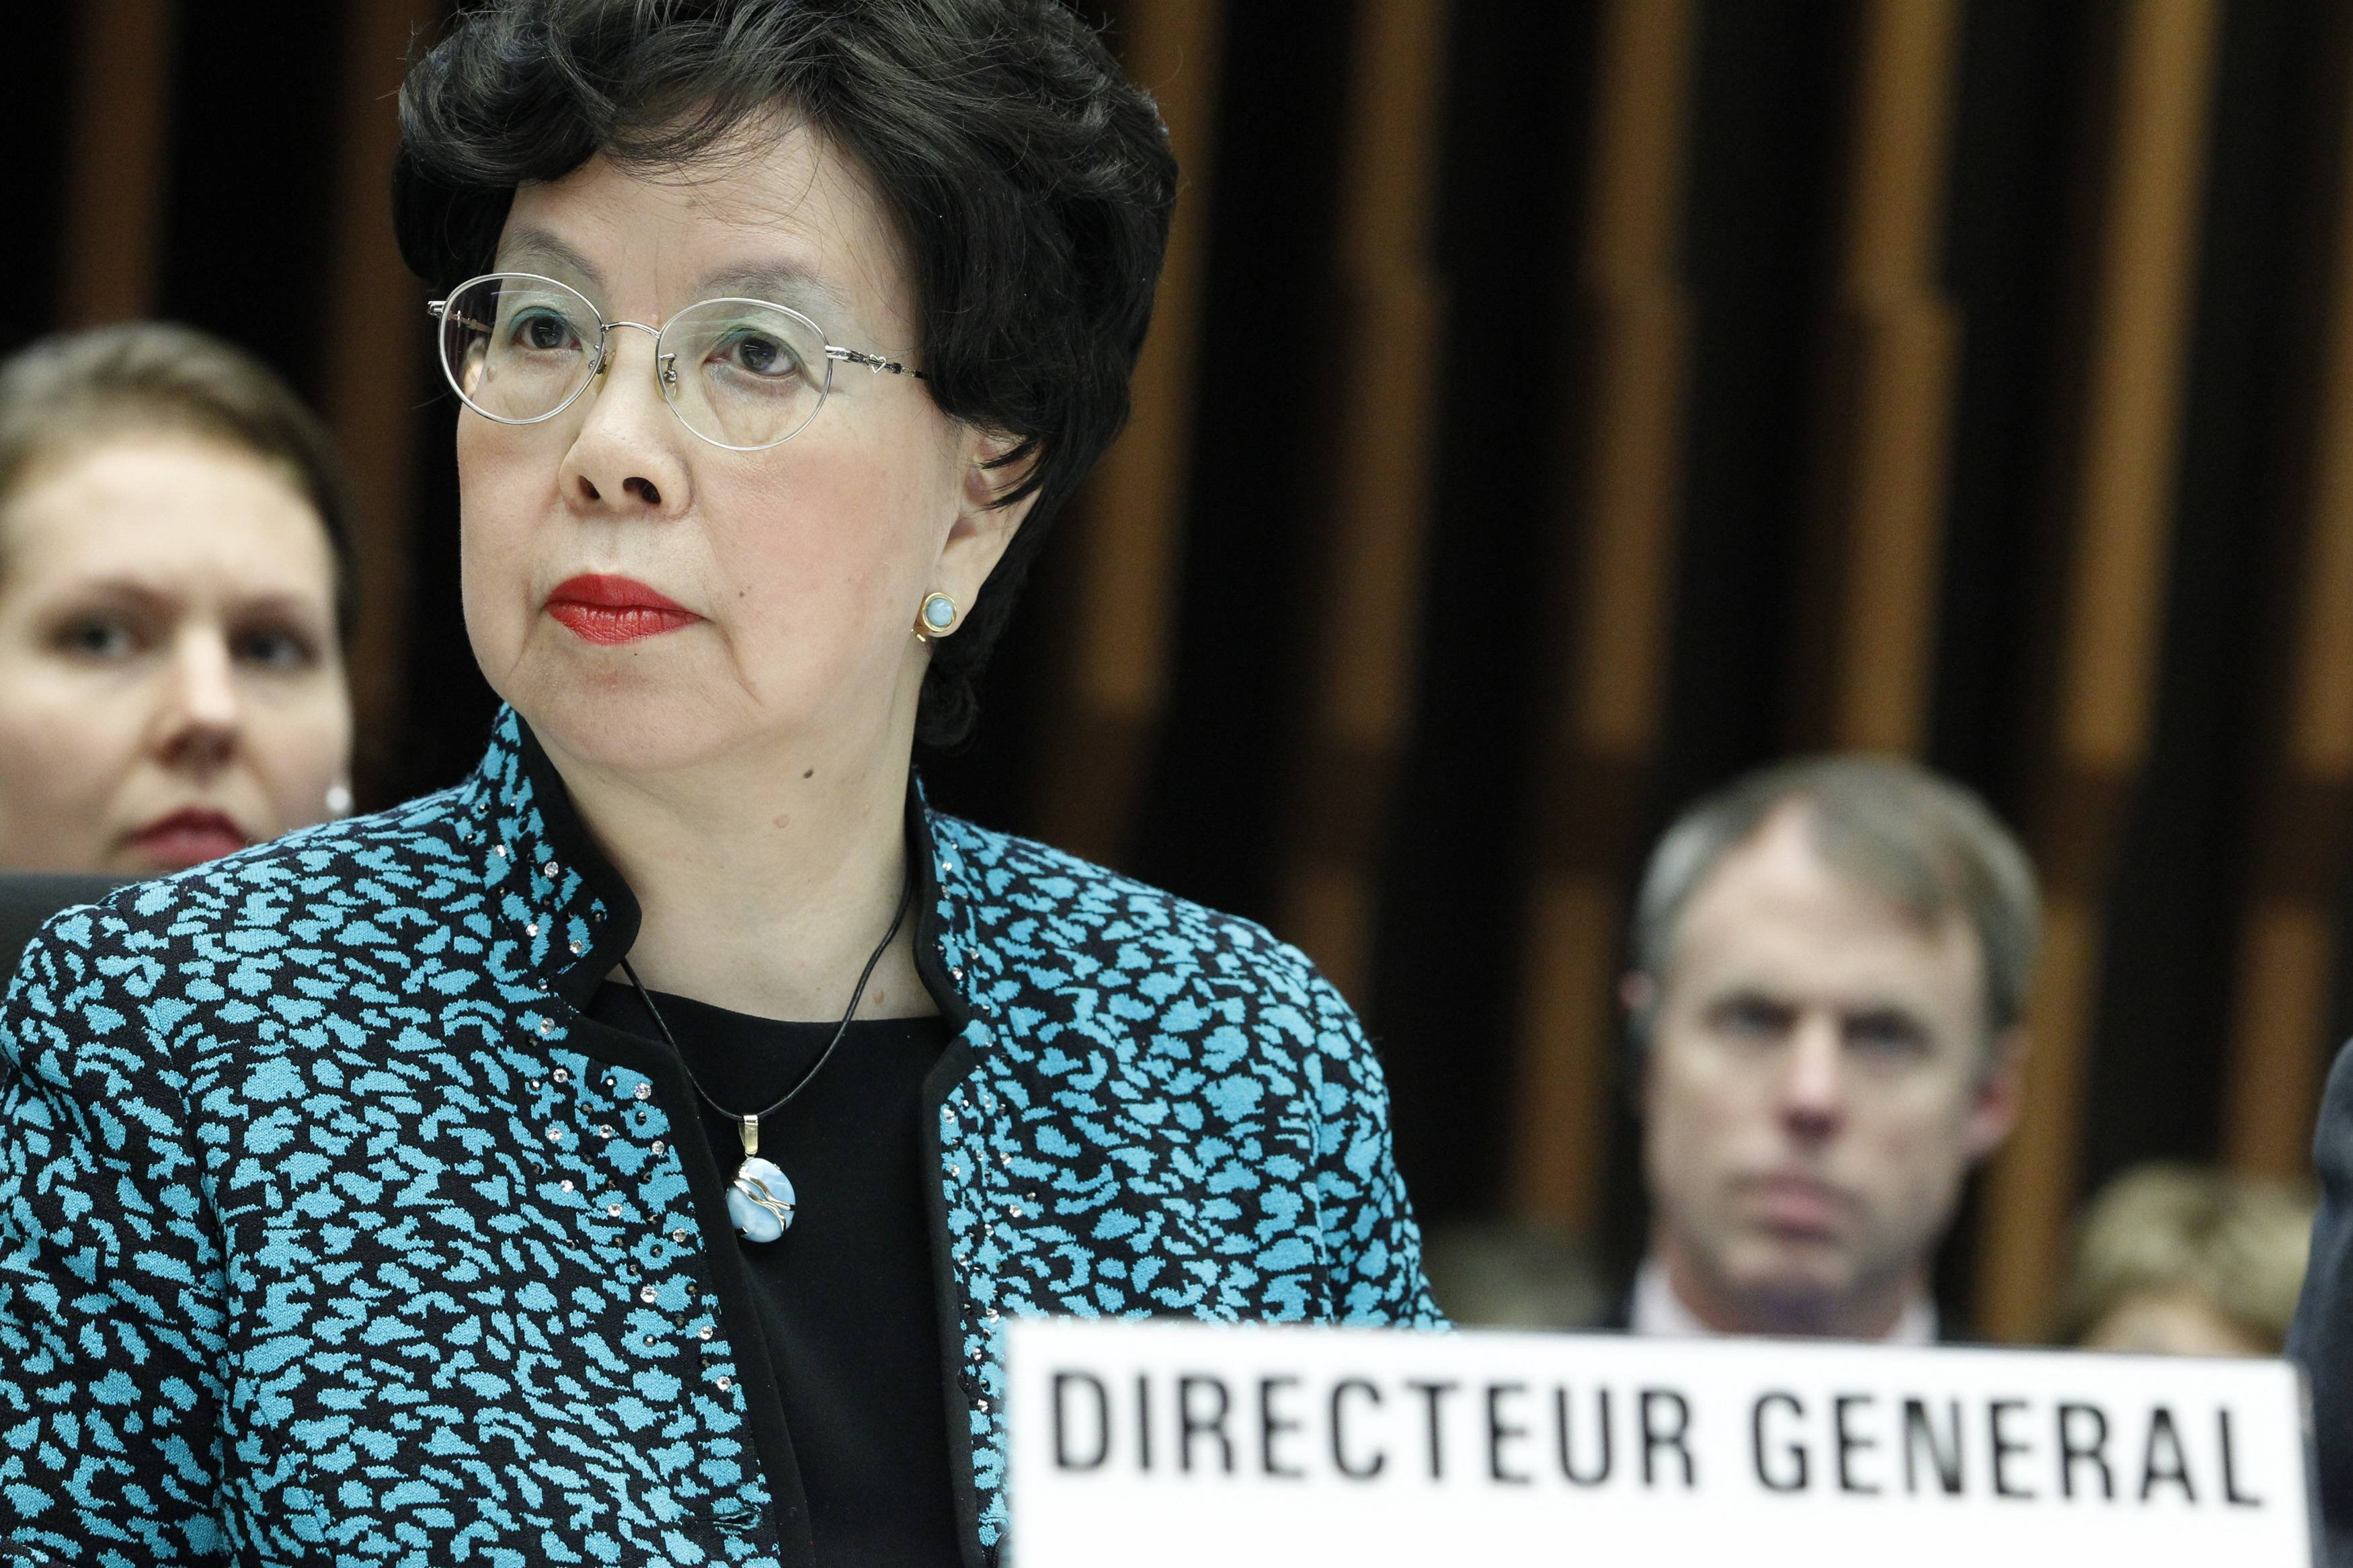 World Health Organization (WHO) Director-General Margaret Chan addresses the media during a special meeting on Ebola at the WHO headquarters in Geneva on Jan. 25, 2015. (Pierre Albouy—Reuters)